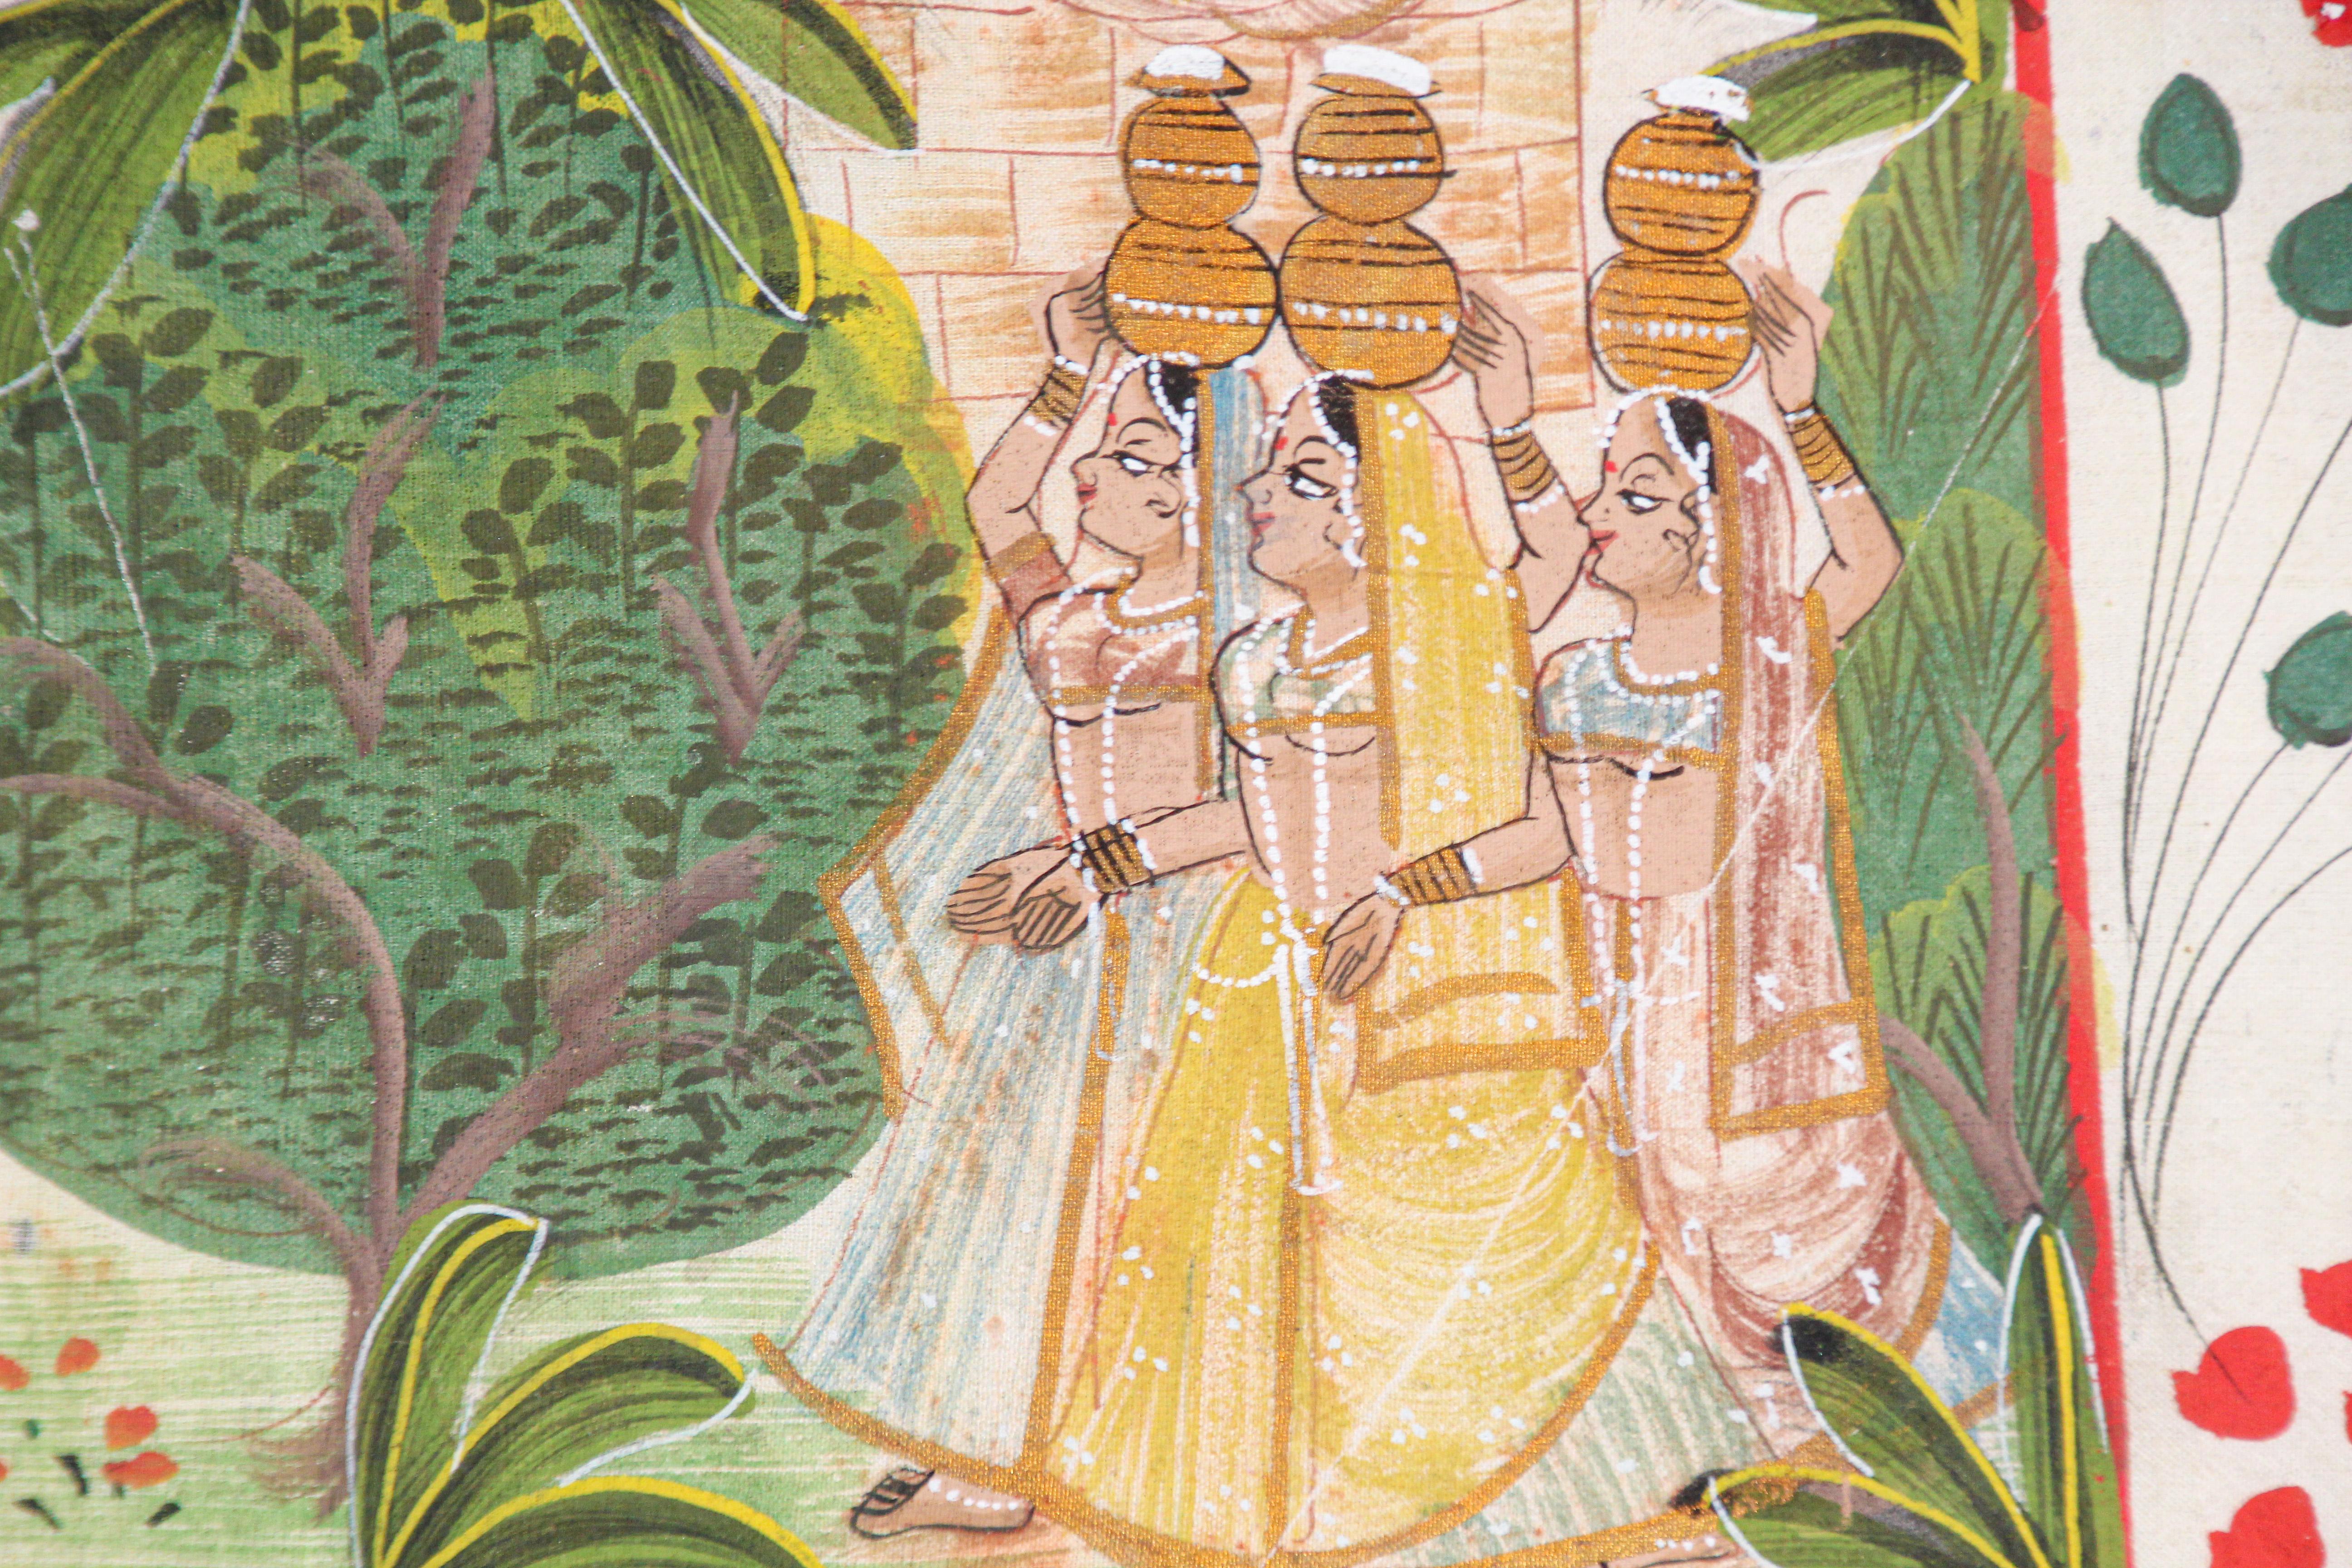 Paper Krishna, Radha, and the Gopis Meet a Young Prince, Picchawai Painting